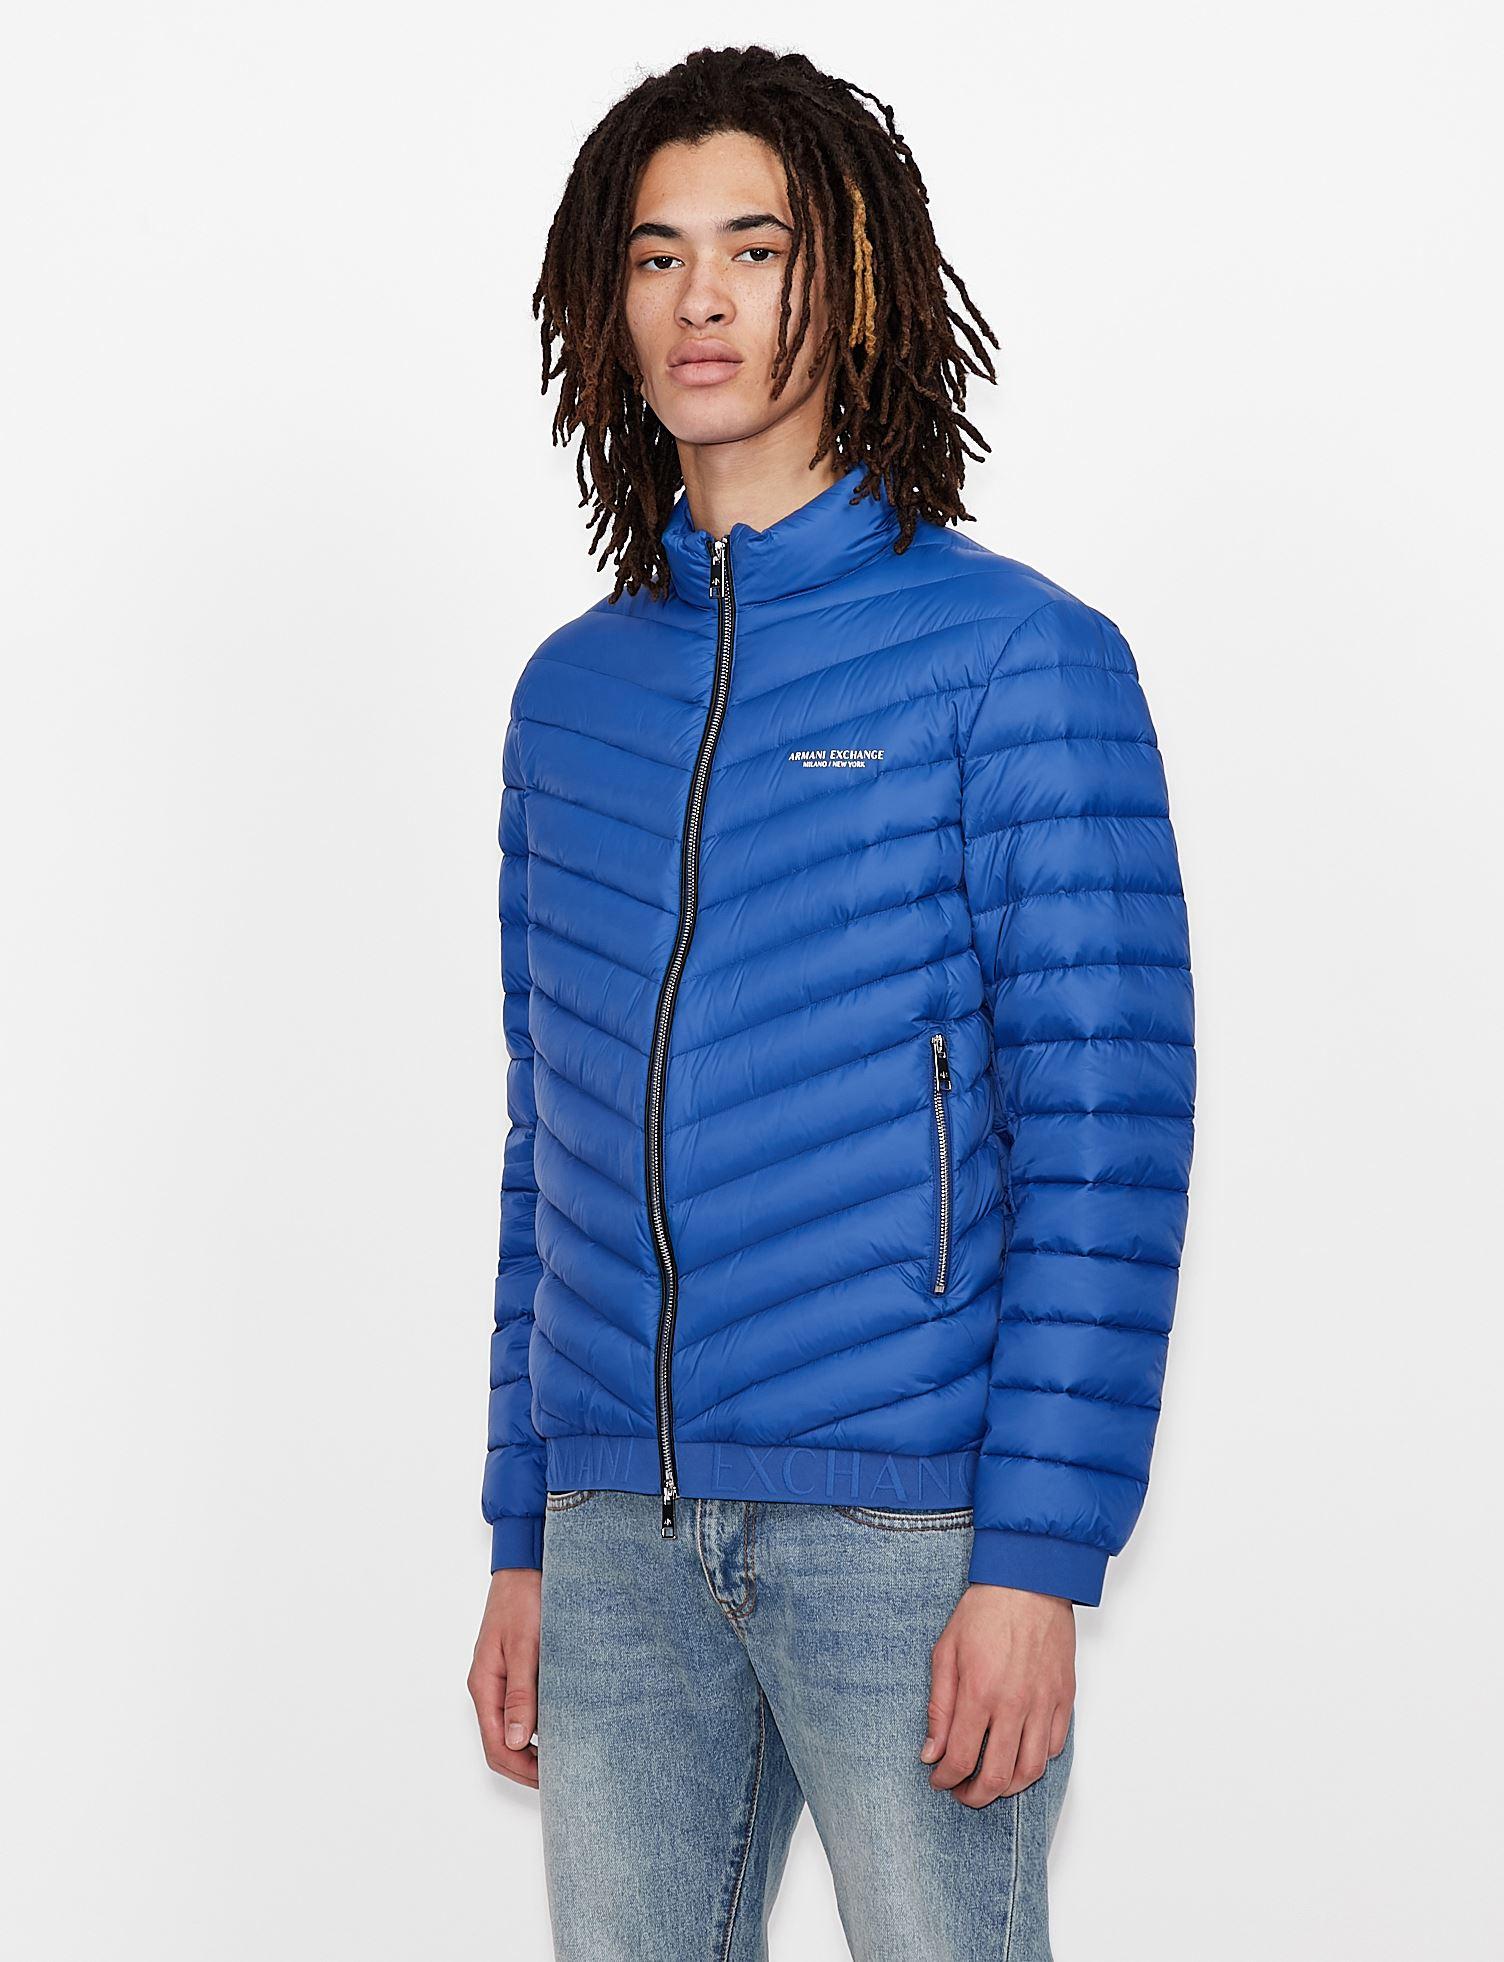 Armani Exchange Milano New York Puffer Jacket in Blue for Men | Lyst